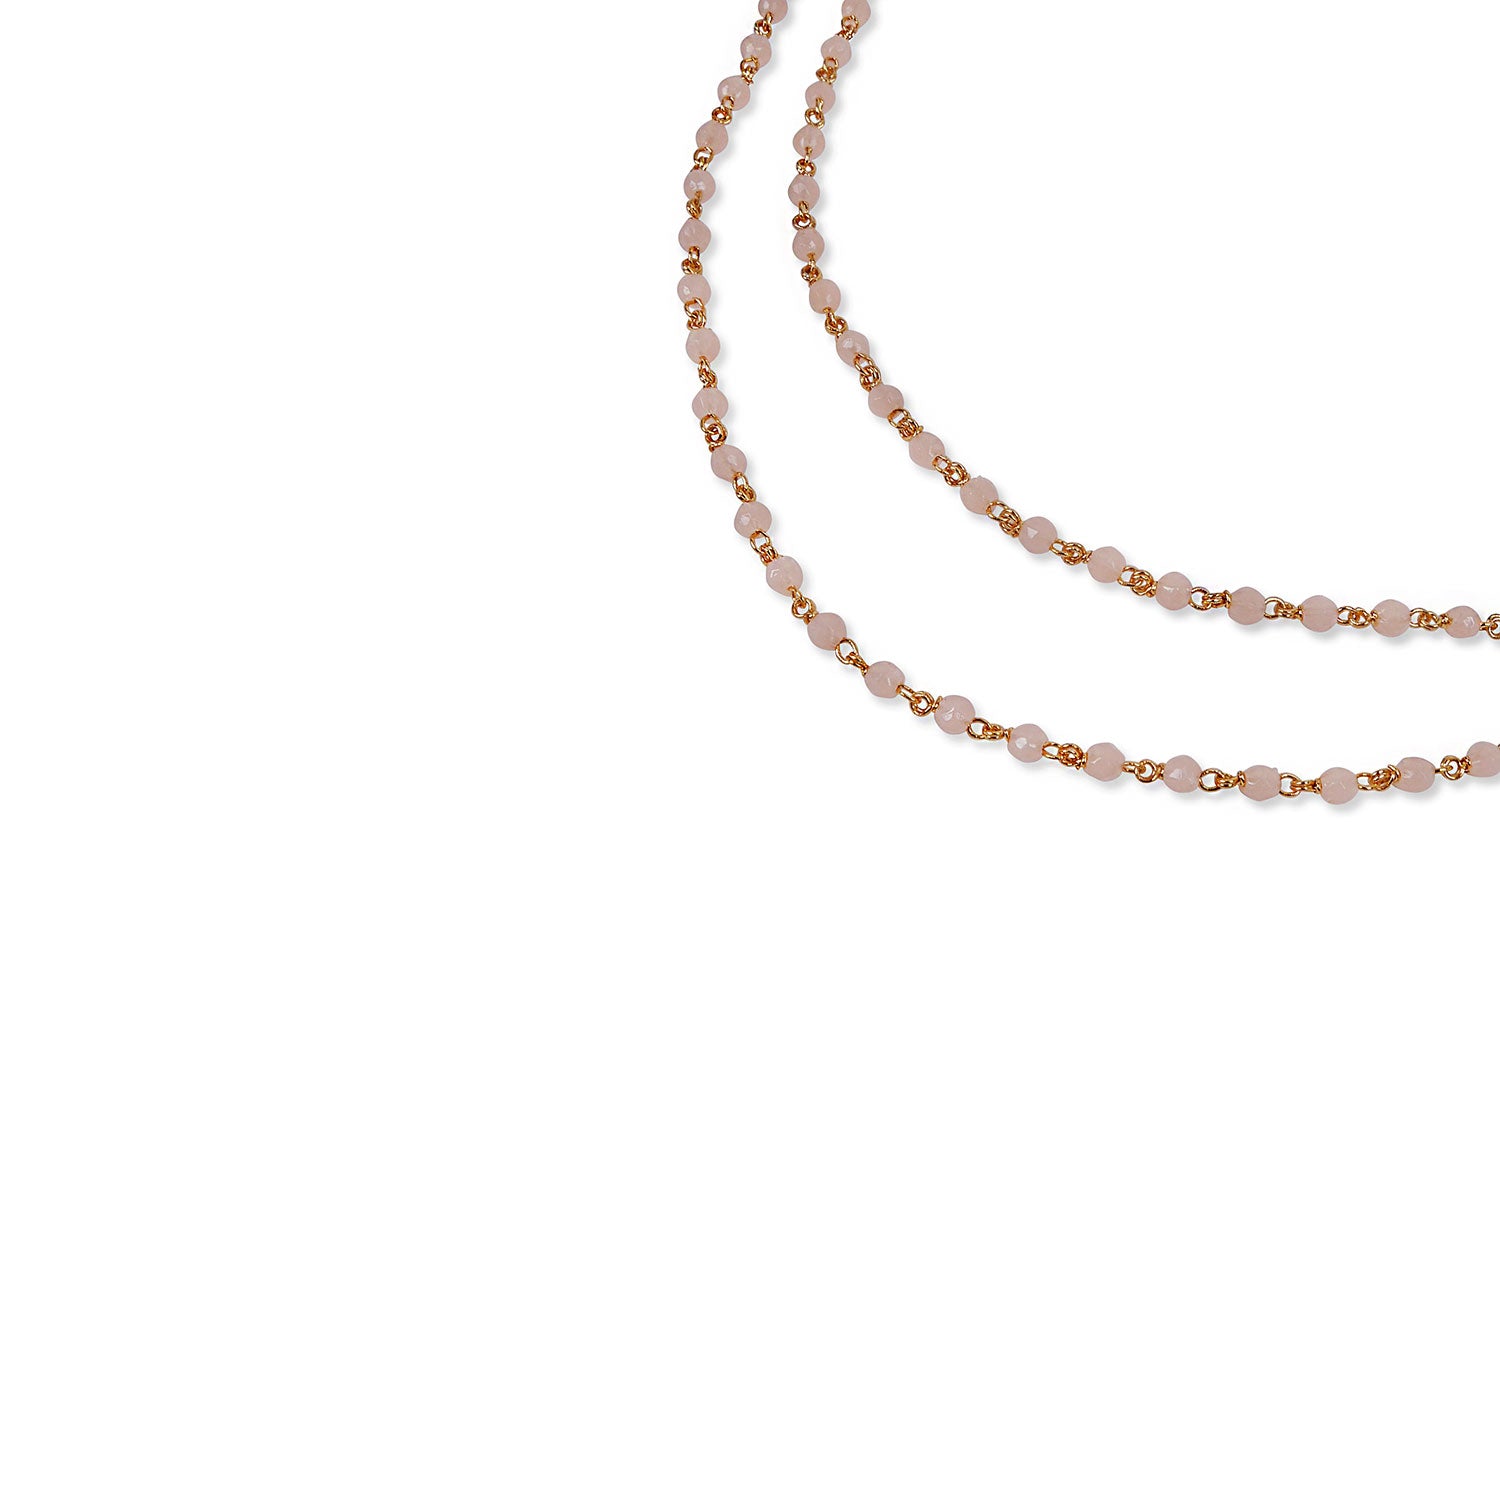 Maria Layered Bead Necklace in Light Pink